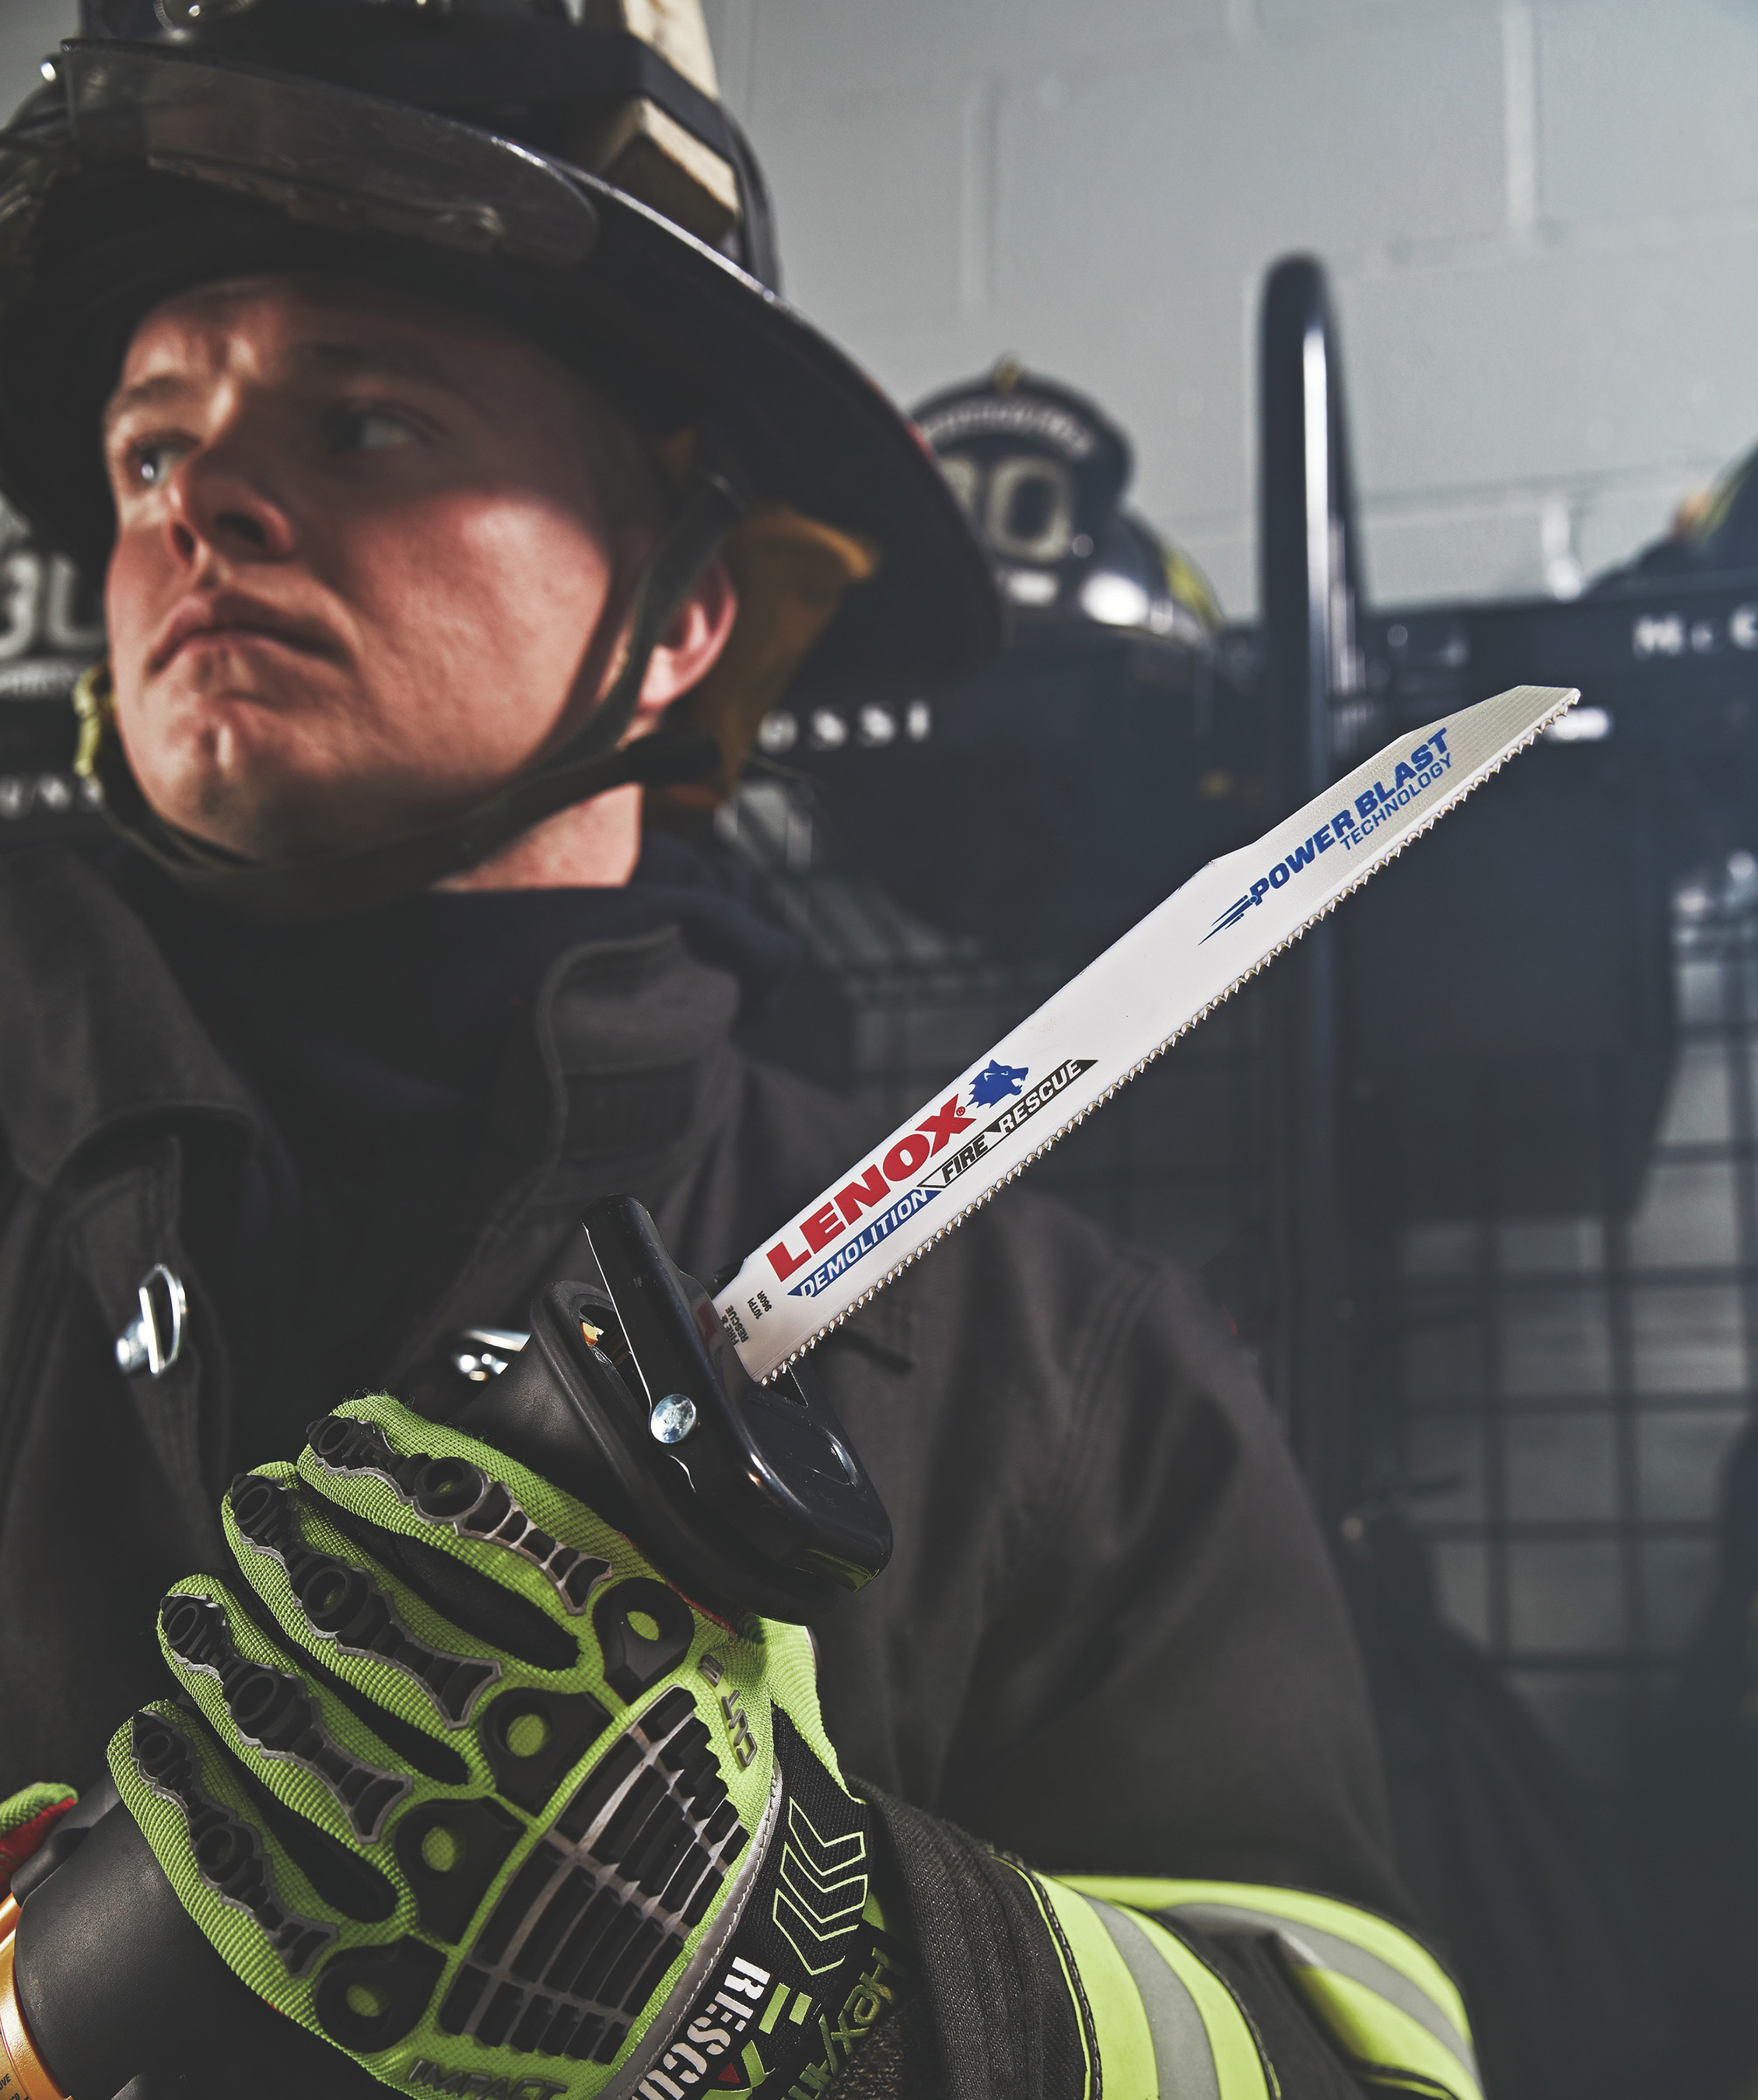 First responders can rely on tools like LENOX® reciprocating saw blades to make sure everyone gets home safe.